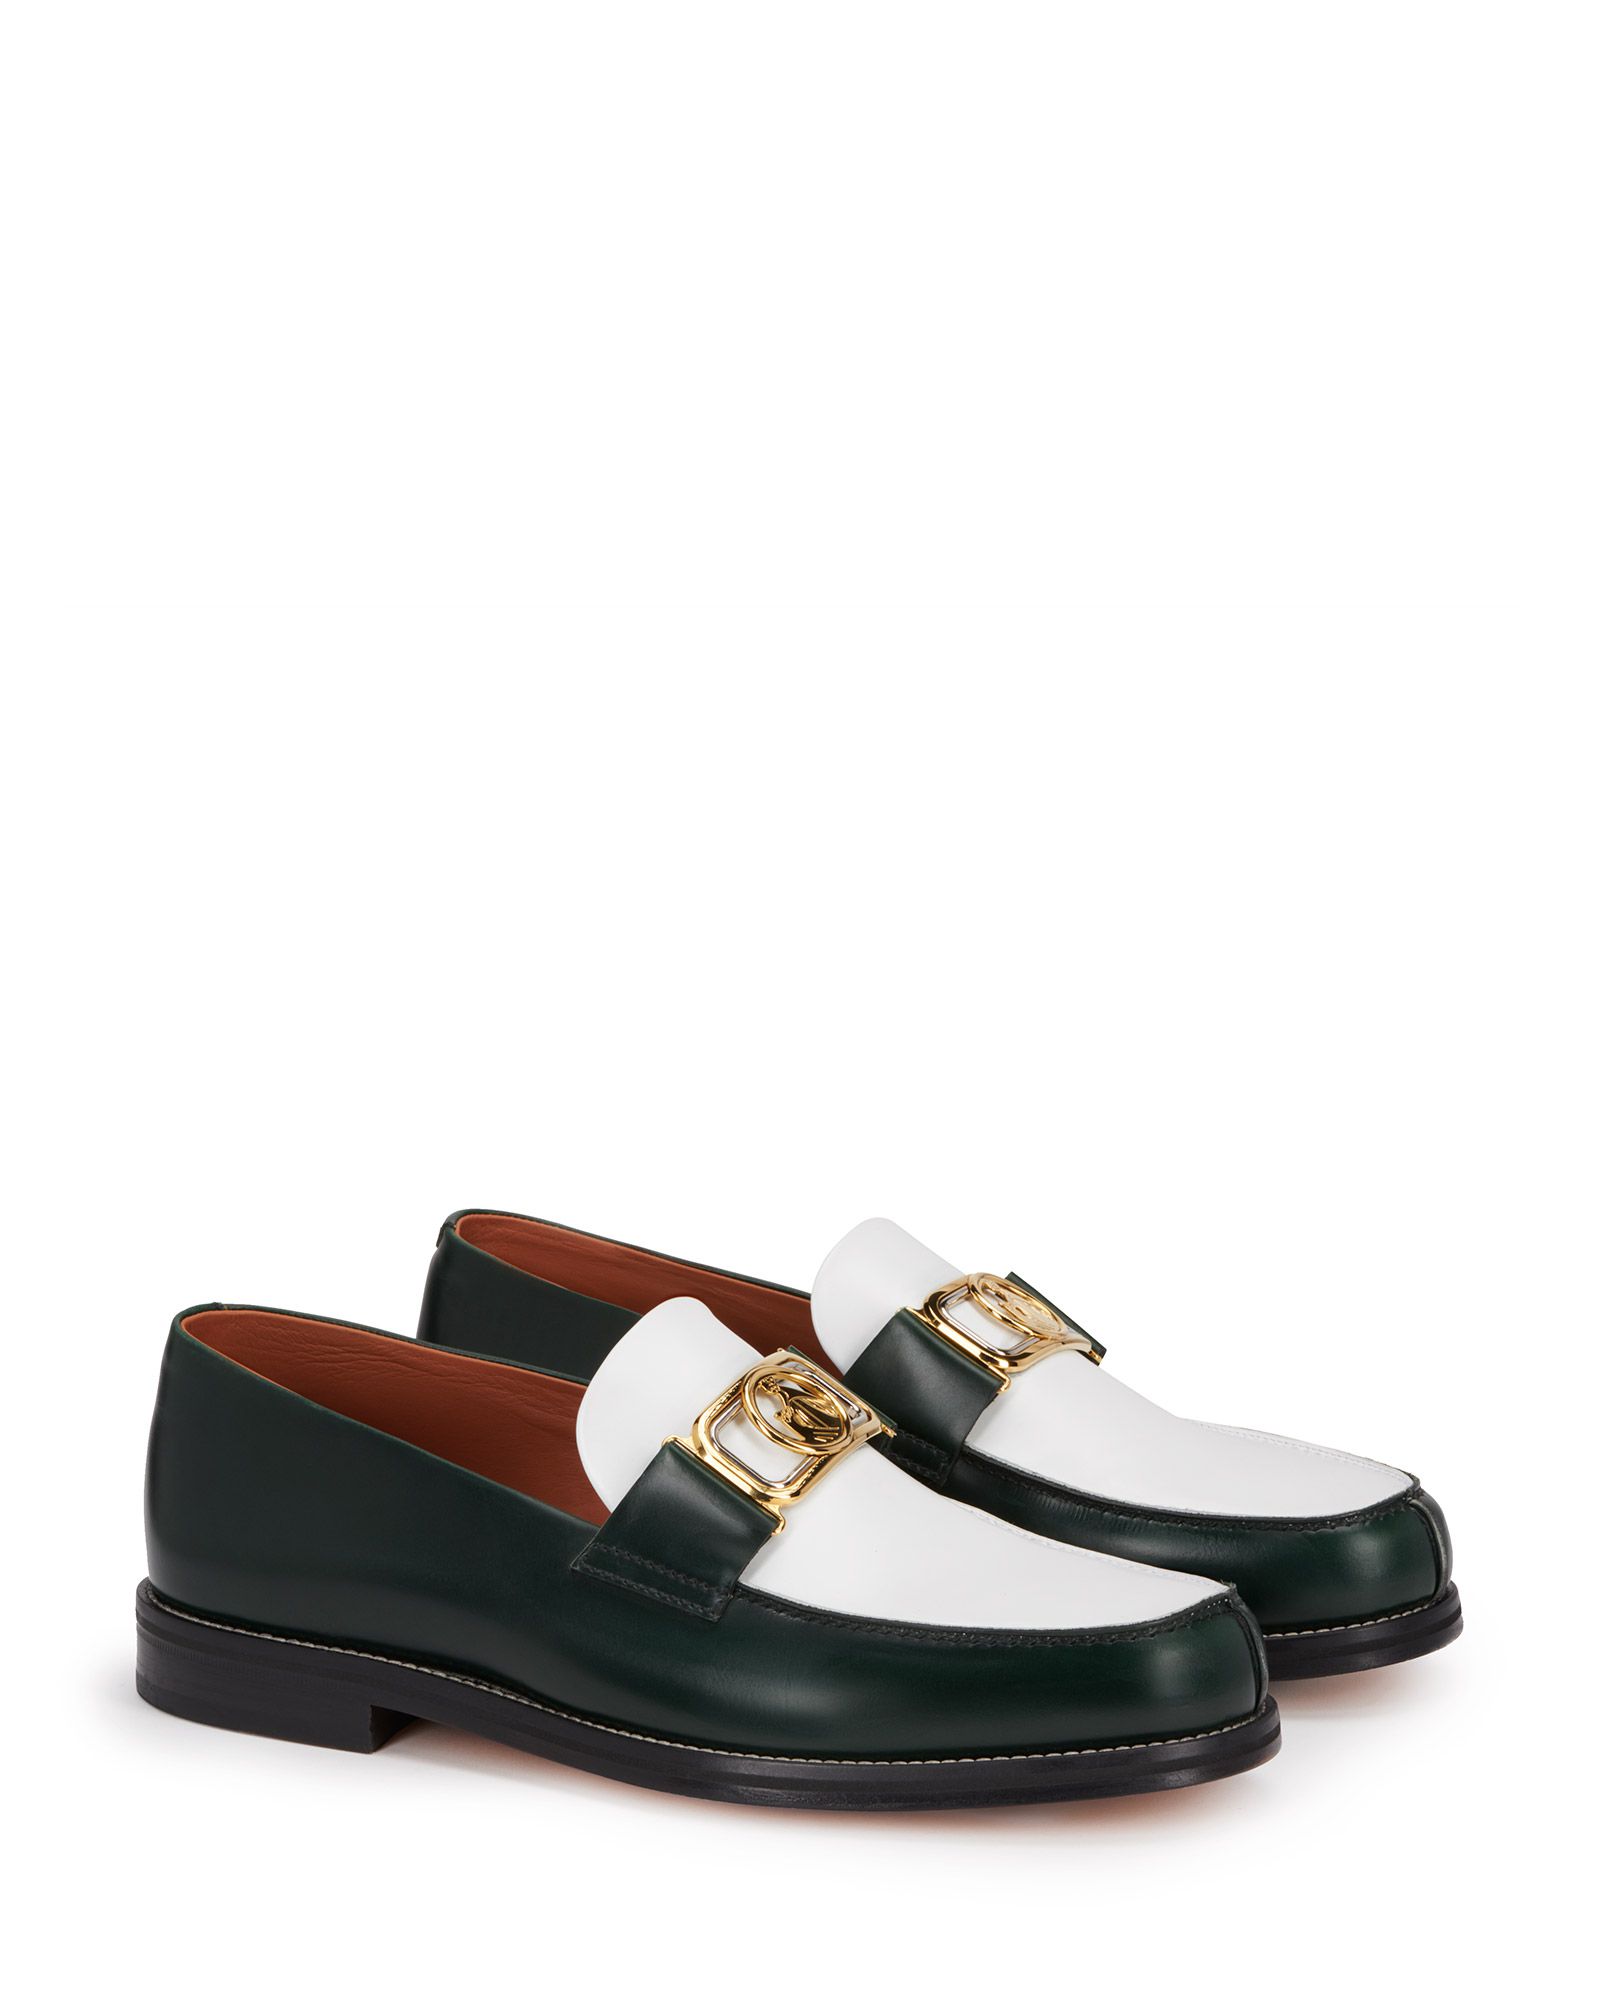 Lanvin SWAN LOAFERS IN BRUSHED LEATHER, Loafers Men | Lanvin Online Store